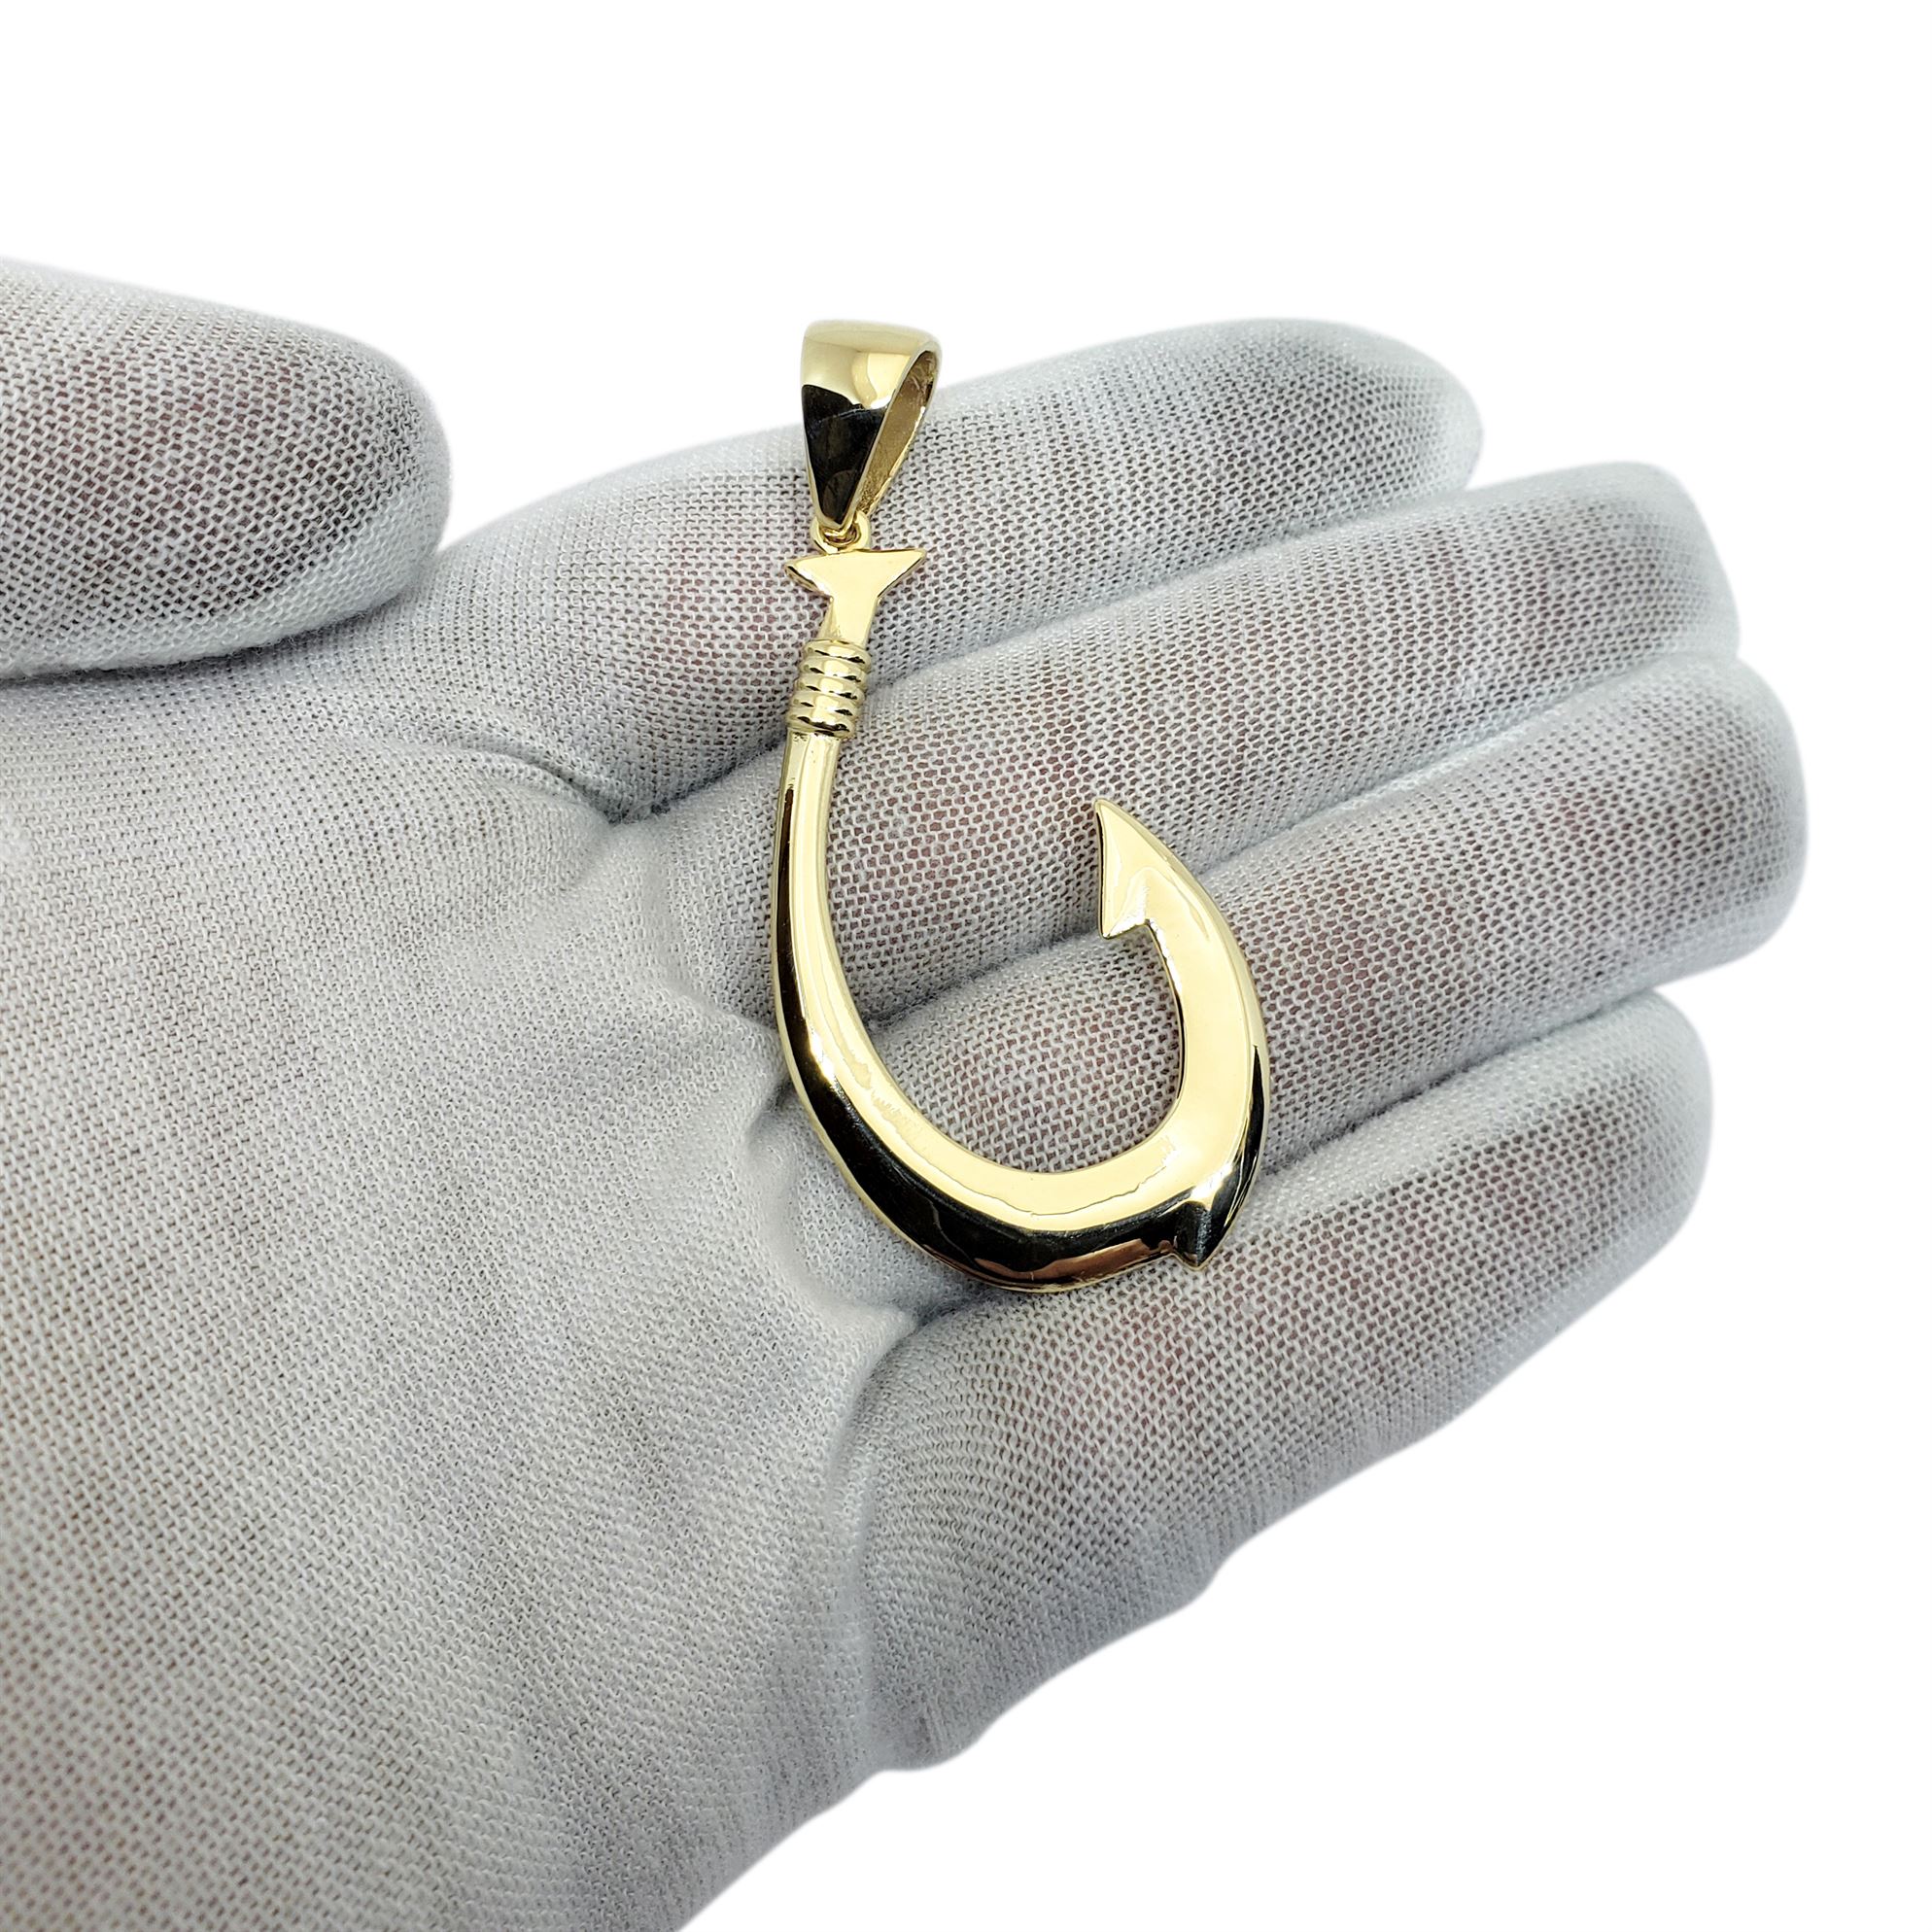 Solid 14K Yellow Gold Fish Hook Pendant, large, 2 1/2 long, 8.5